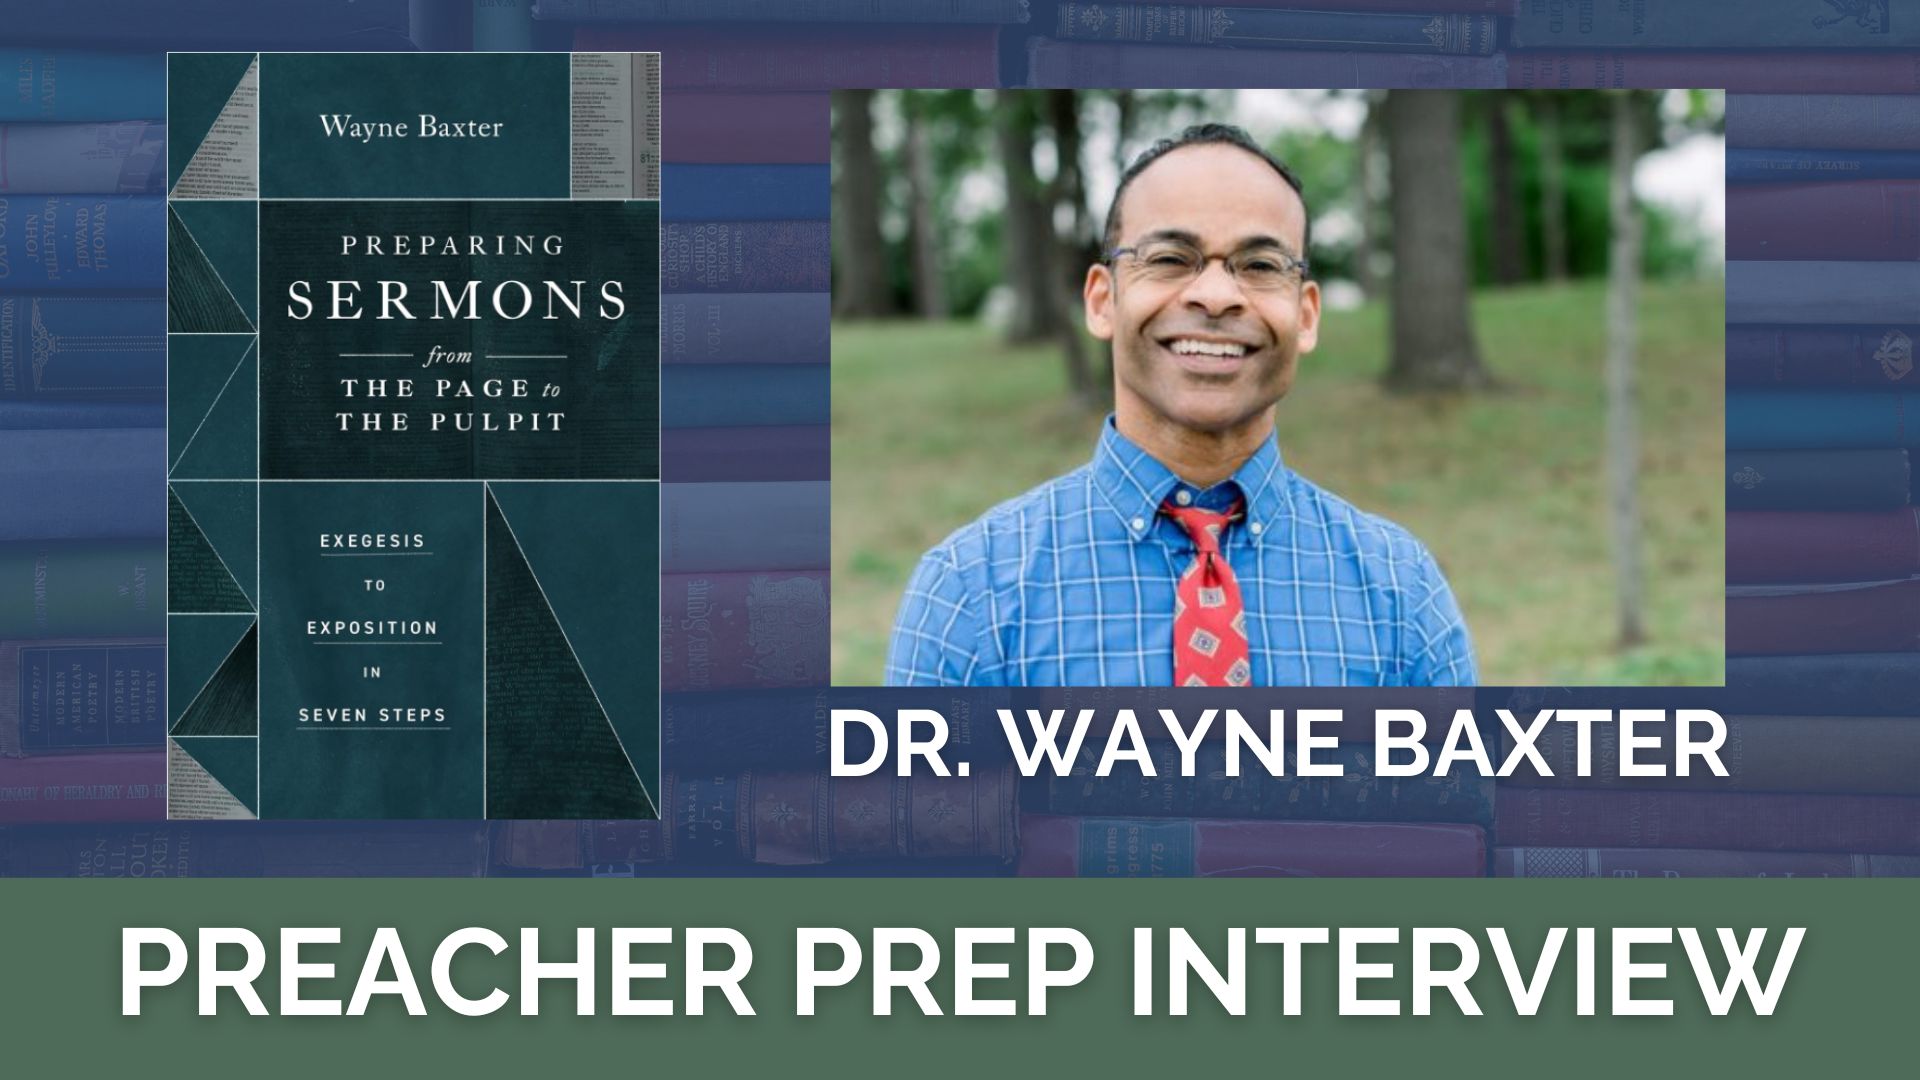 Interview with Dr. Wayne Baxter